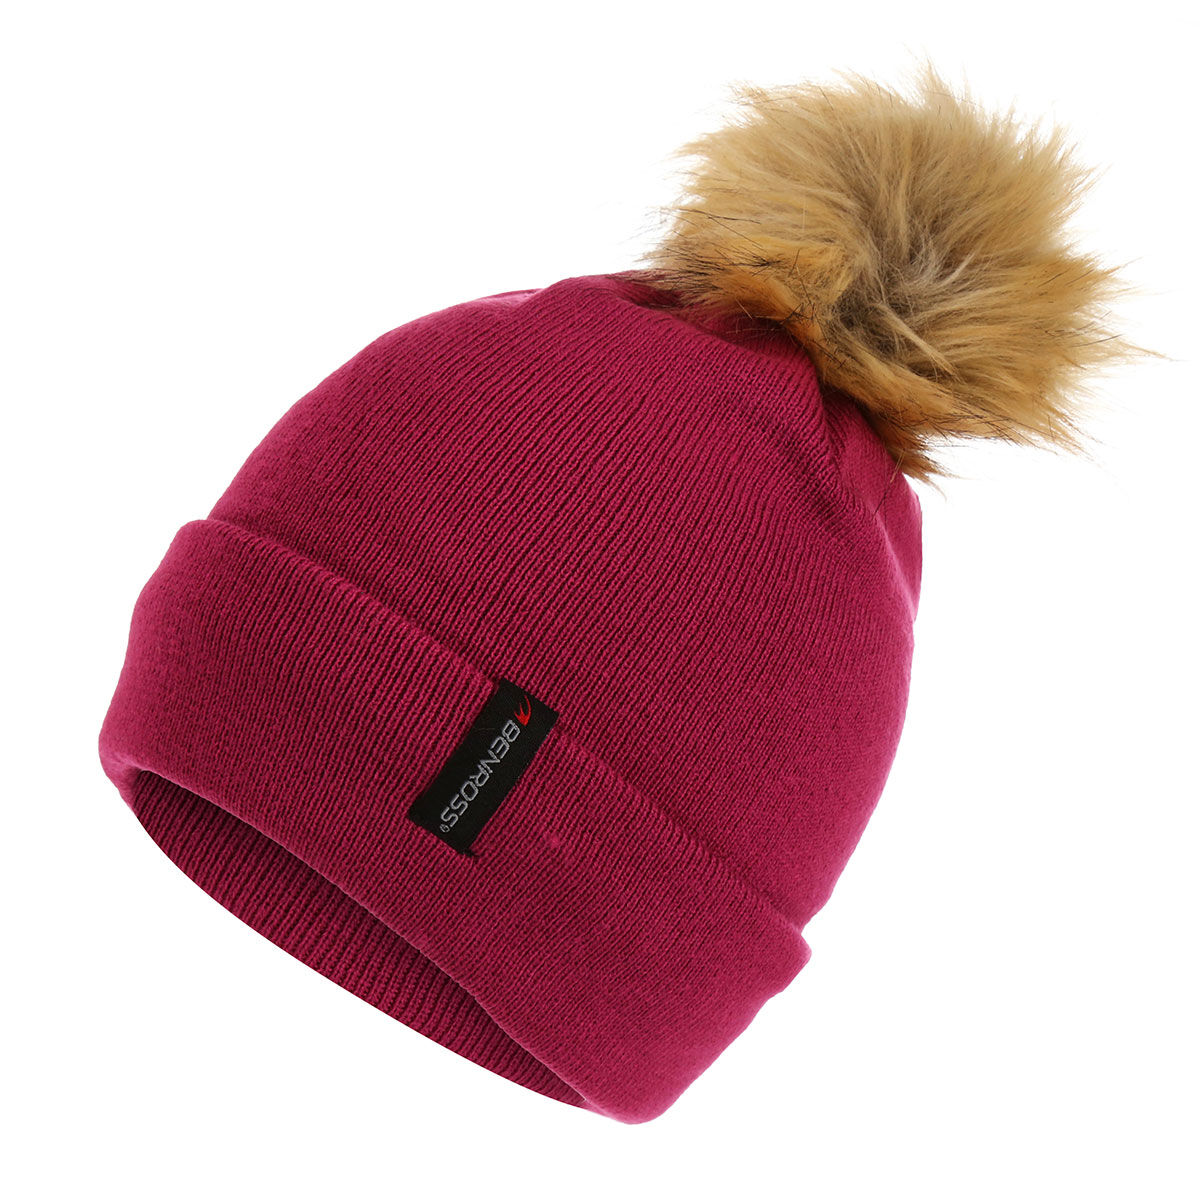 Benross Pink Comfortable Knitted Fleece Pom Golf Hat | American Golf, One Size